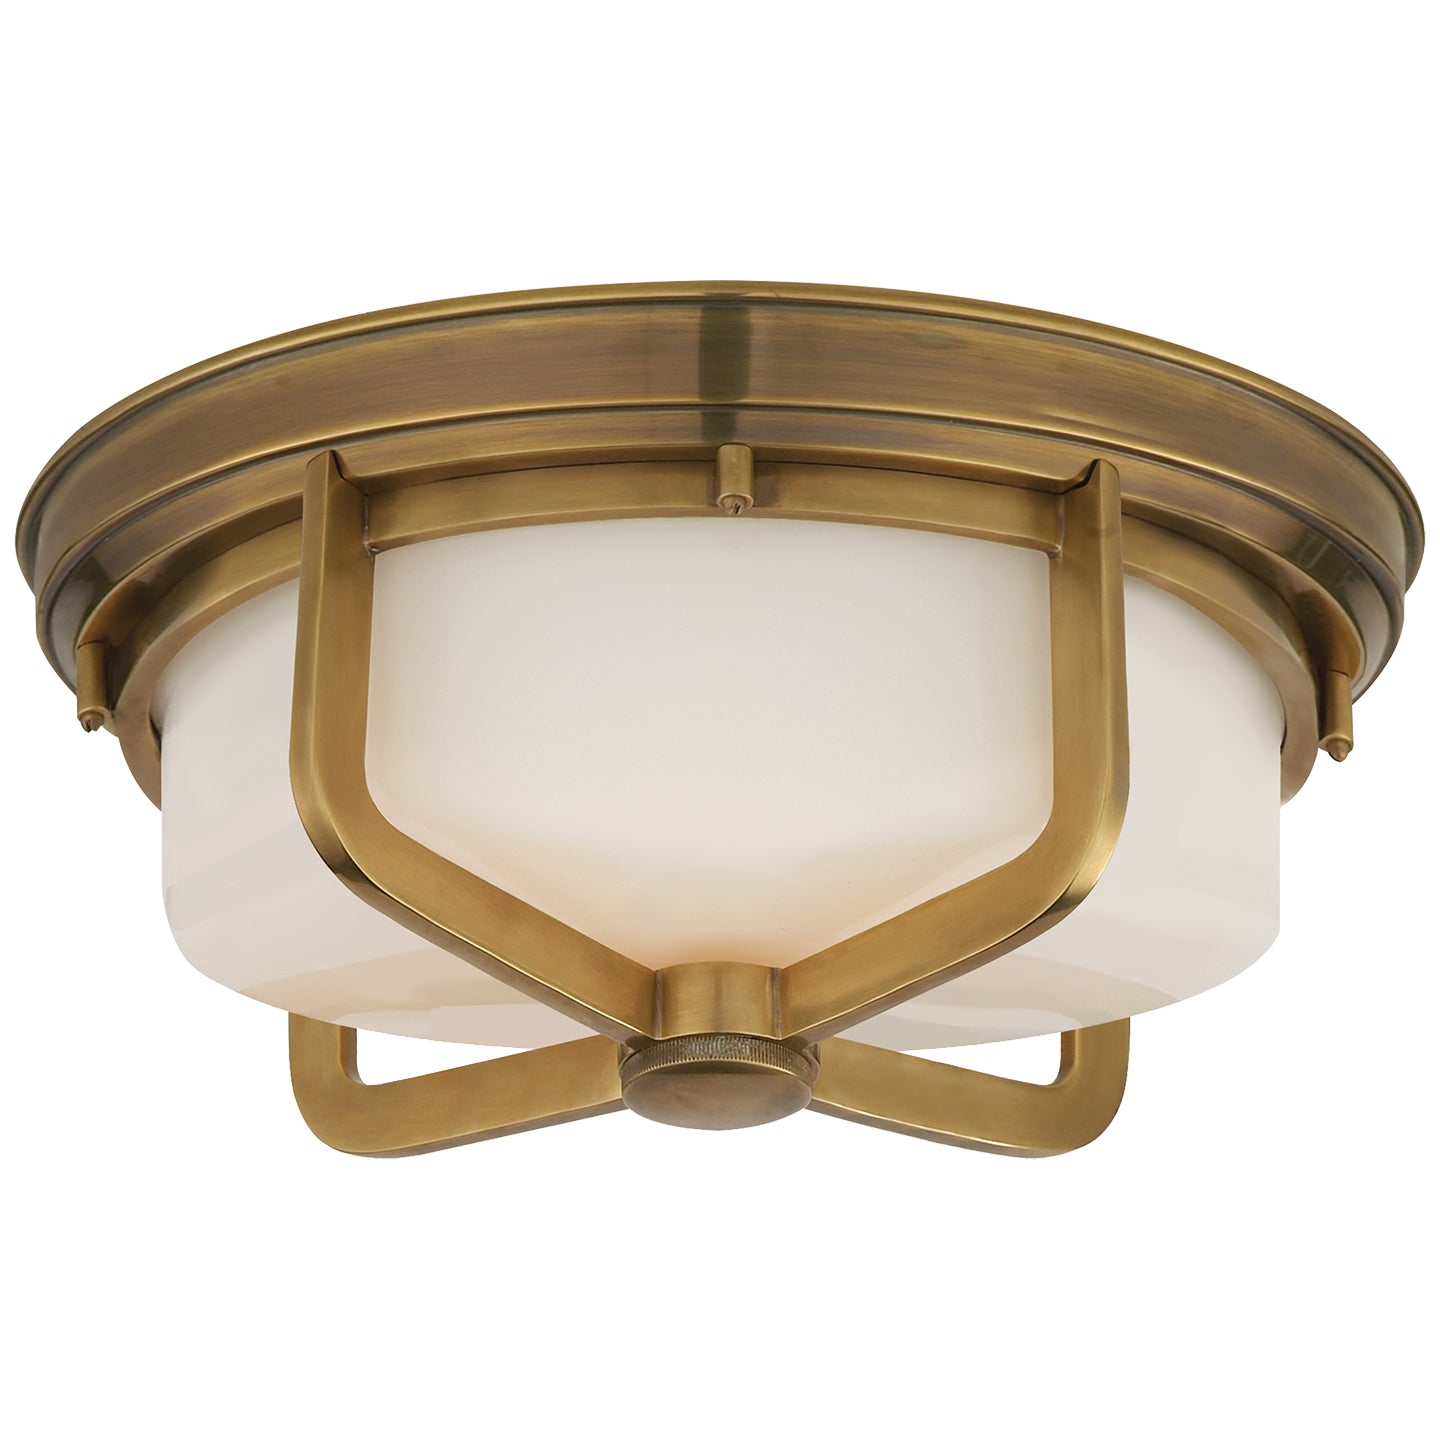 Load image into Gallery viewer, Visual Comfort Signature - TOB 4013HAB-WG - Two Light Flush Mount - Milton - Hand-Rubbed Antique Brass
